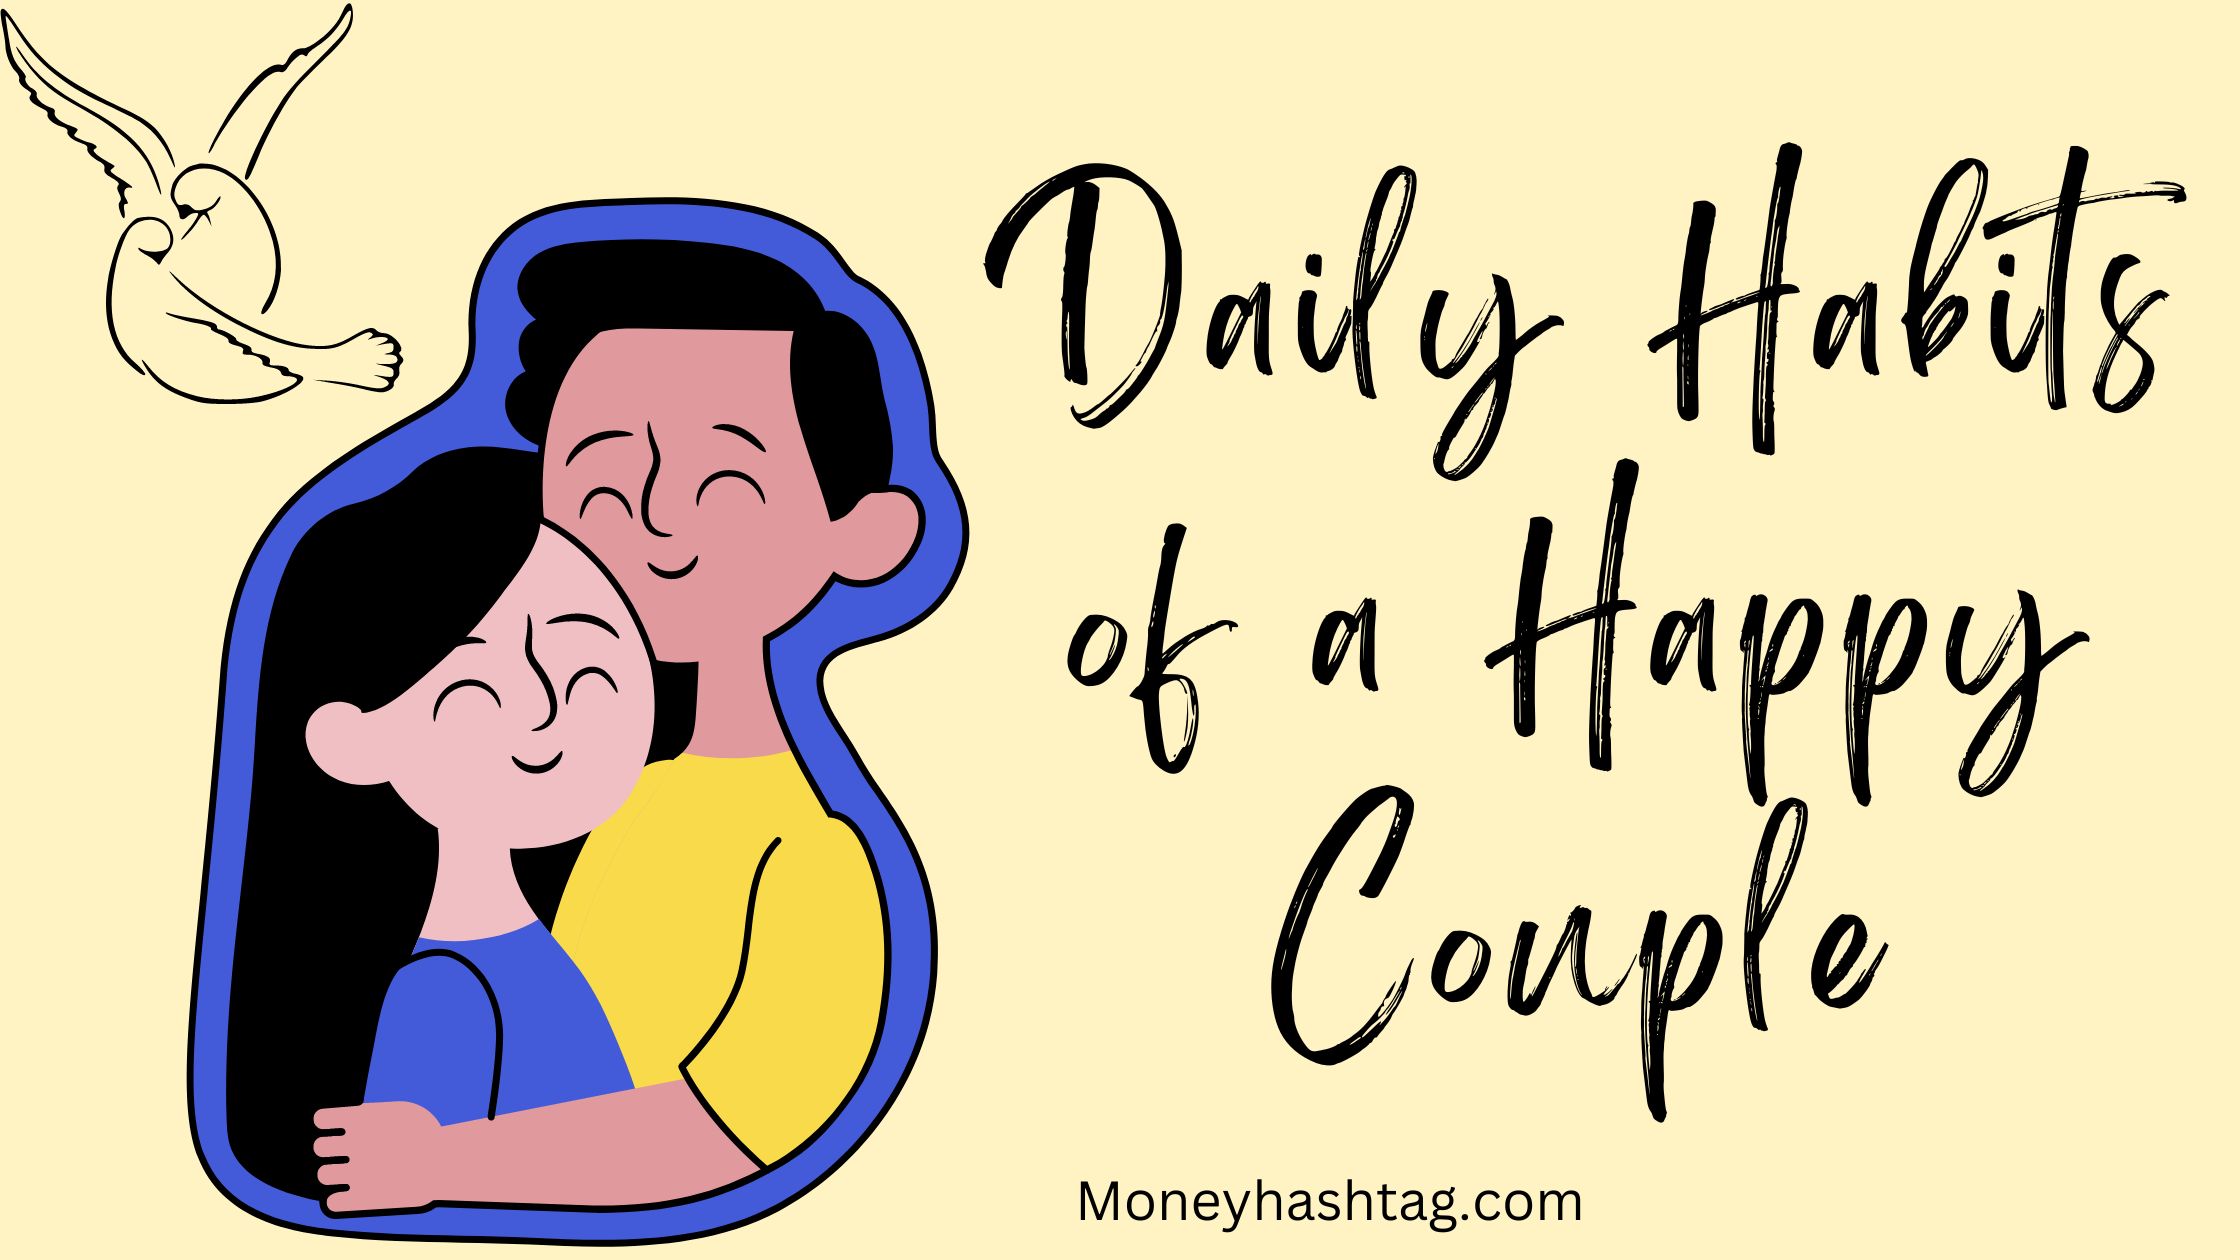 21 Daily Habits of a Happy Couple: How to be happier every day 4